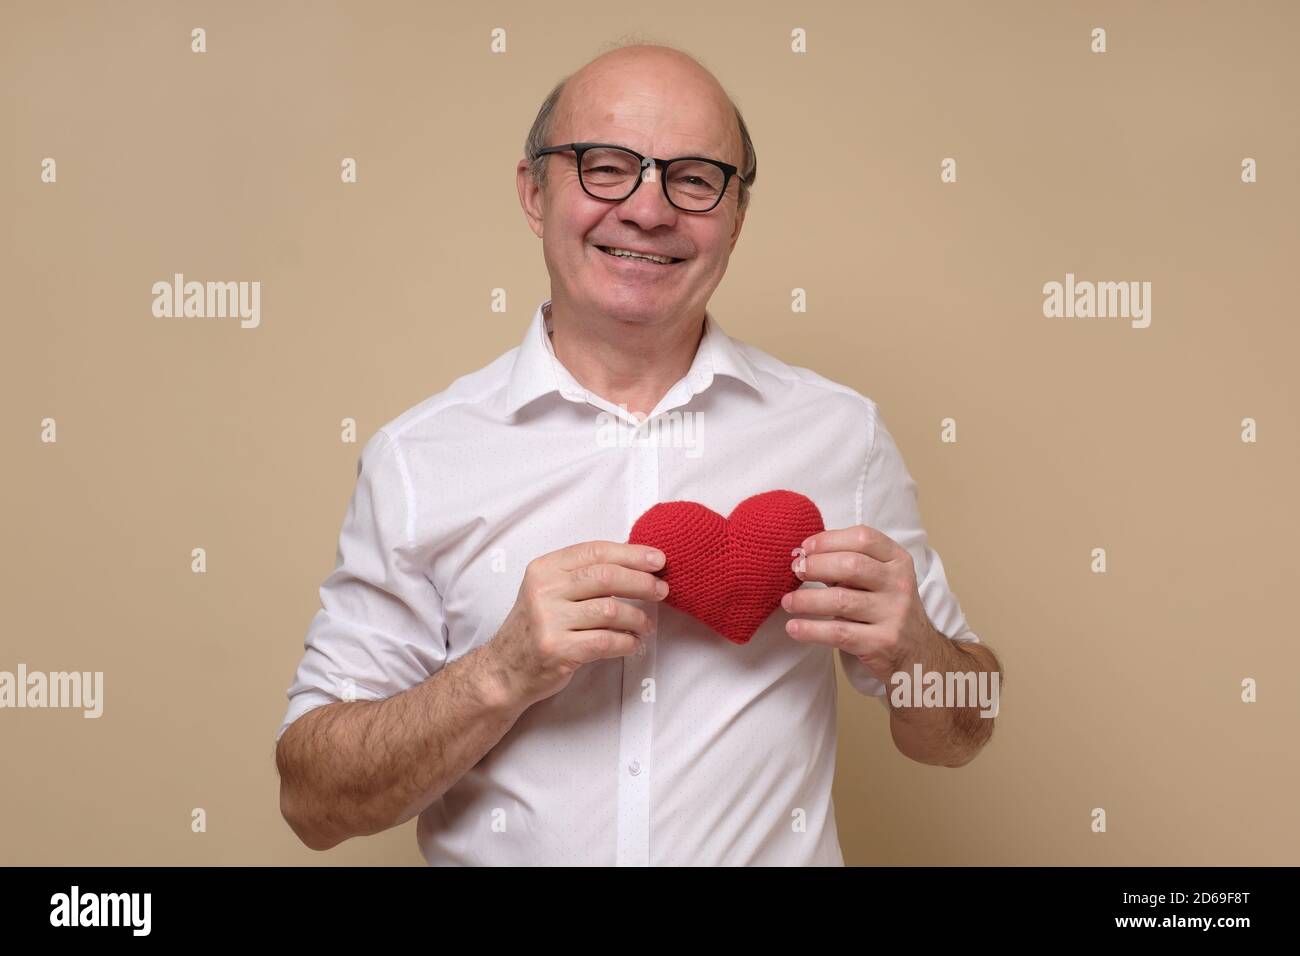 Senior gentleman in glasses holding a red heart smiling. Stock Photo